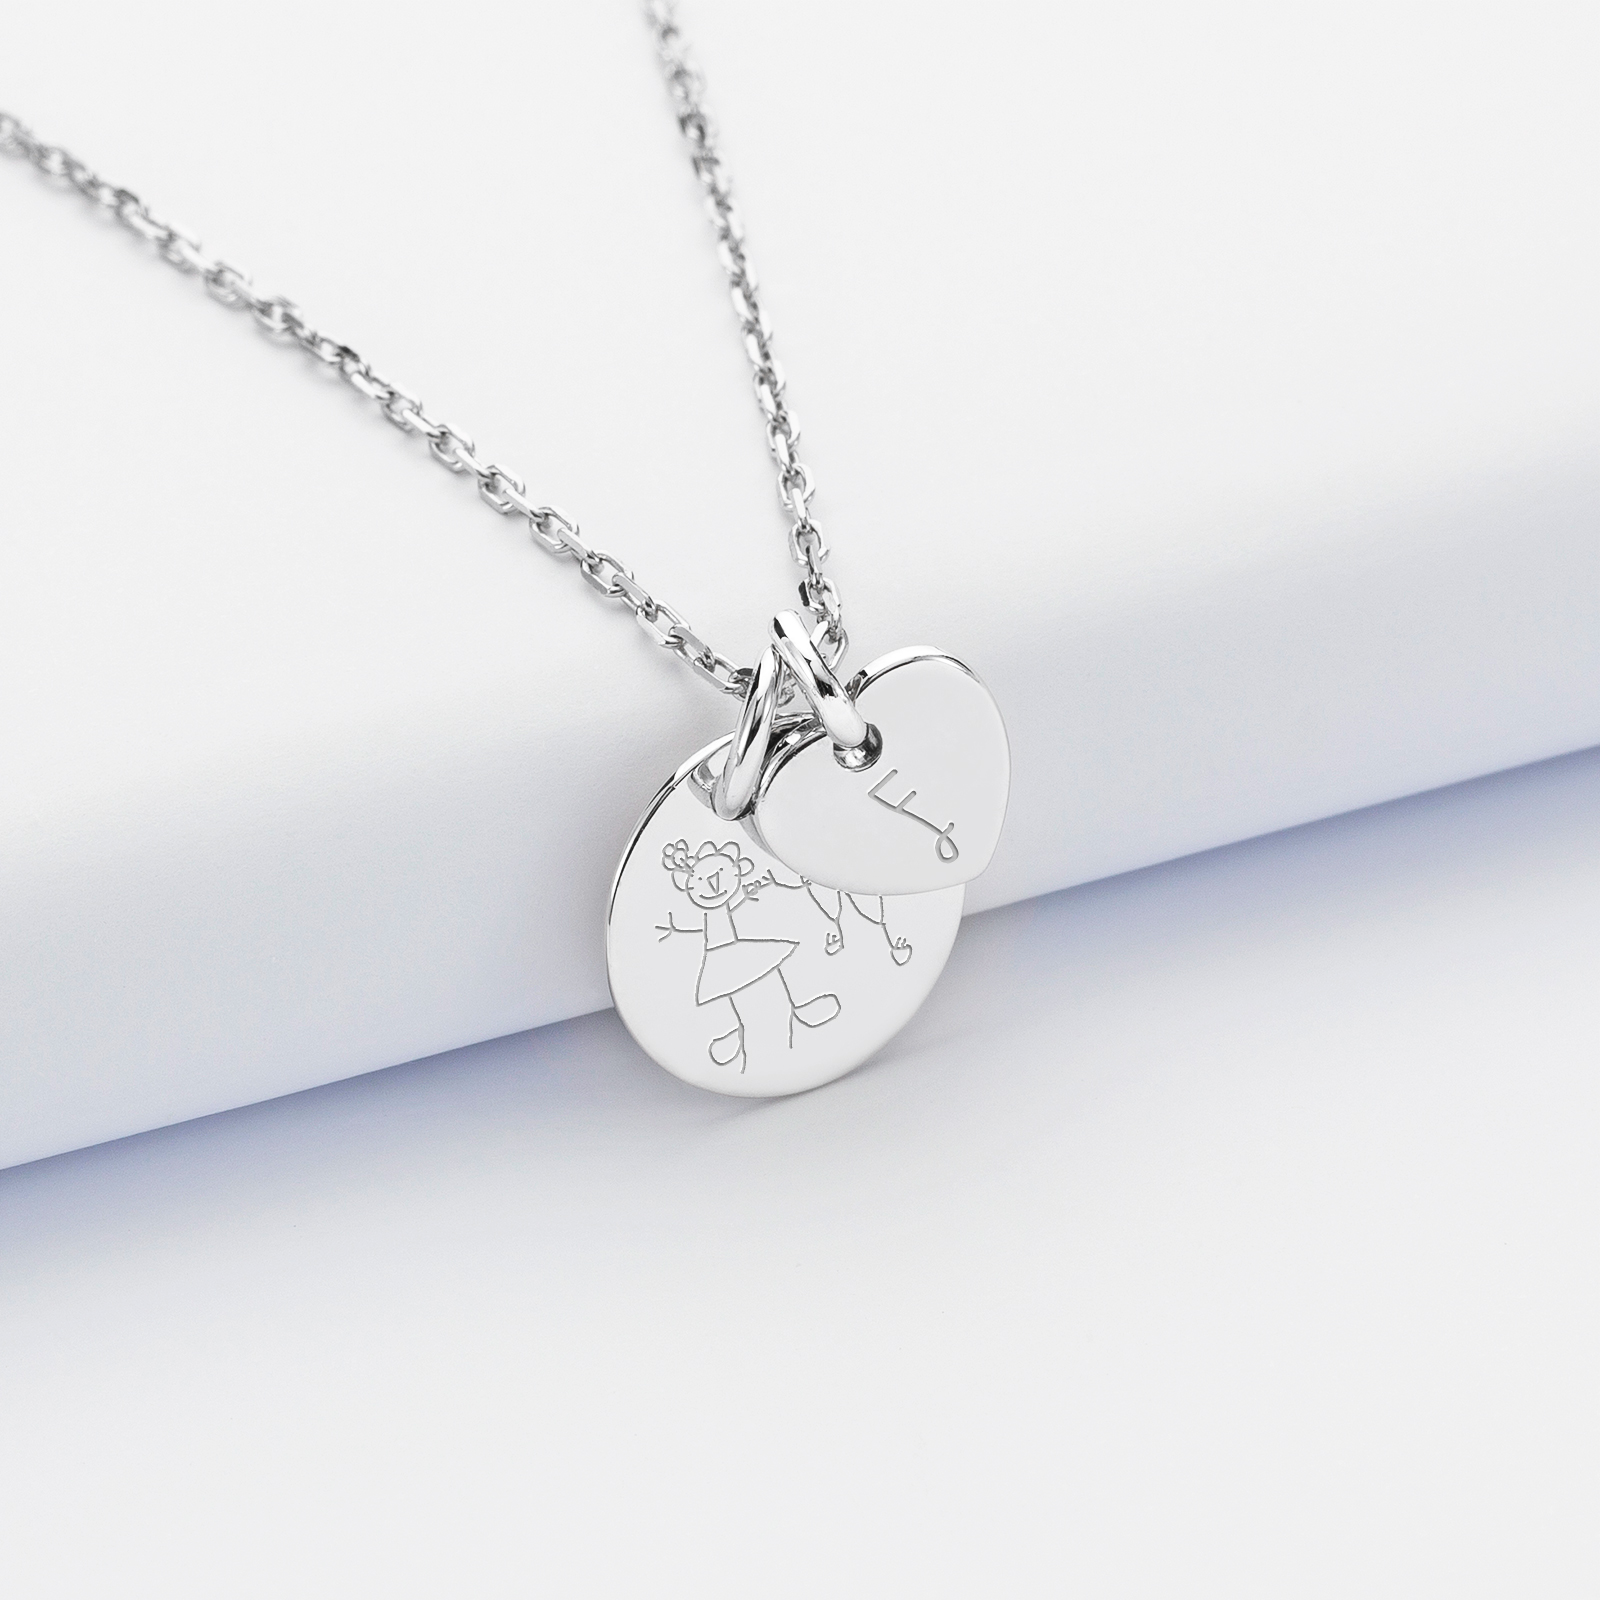 Personalised engraved silver medallion pendant 15 mm and heart charm 10mm - sketch